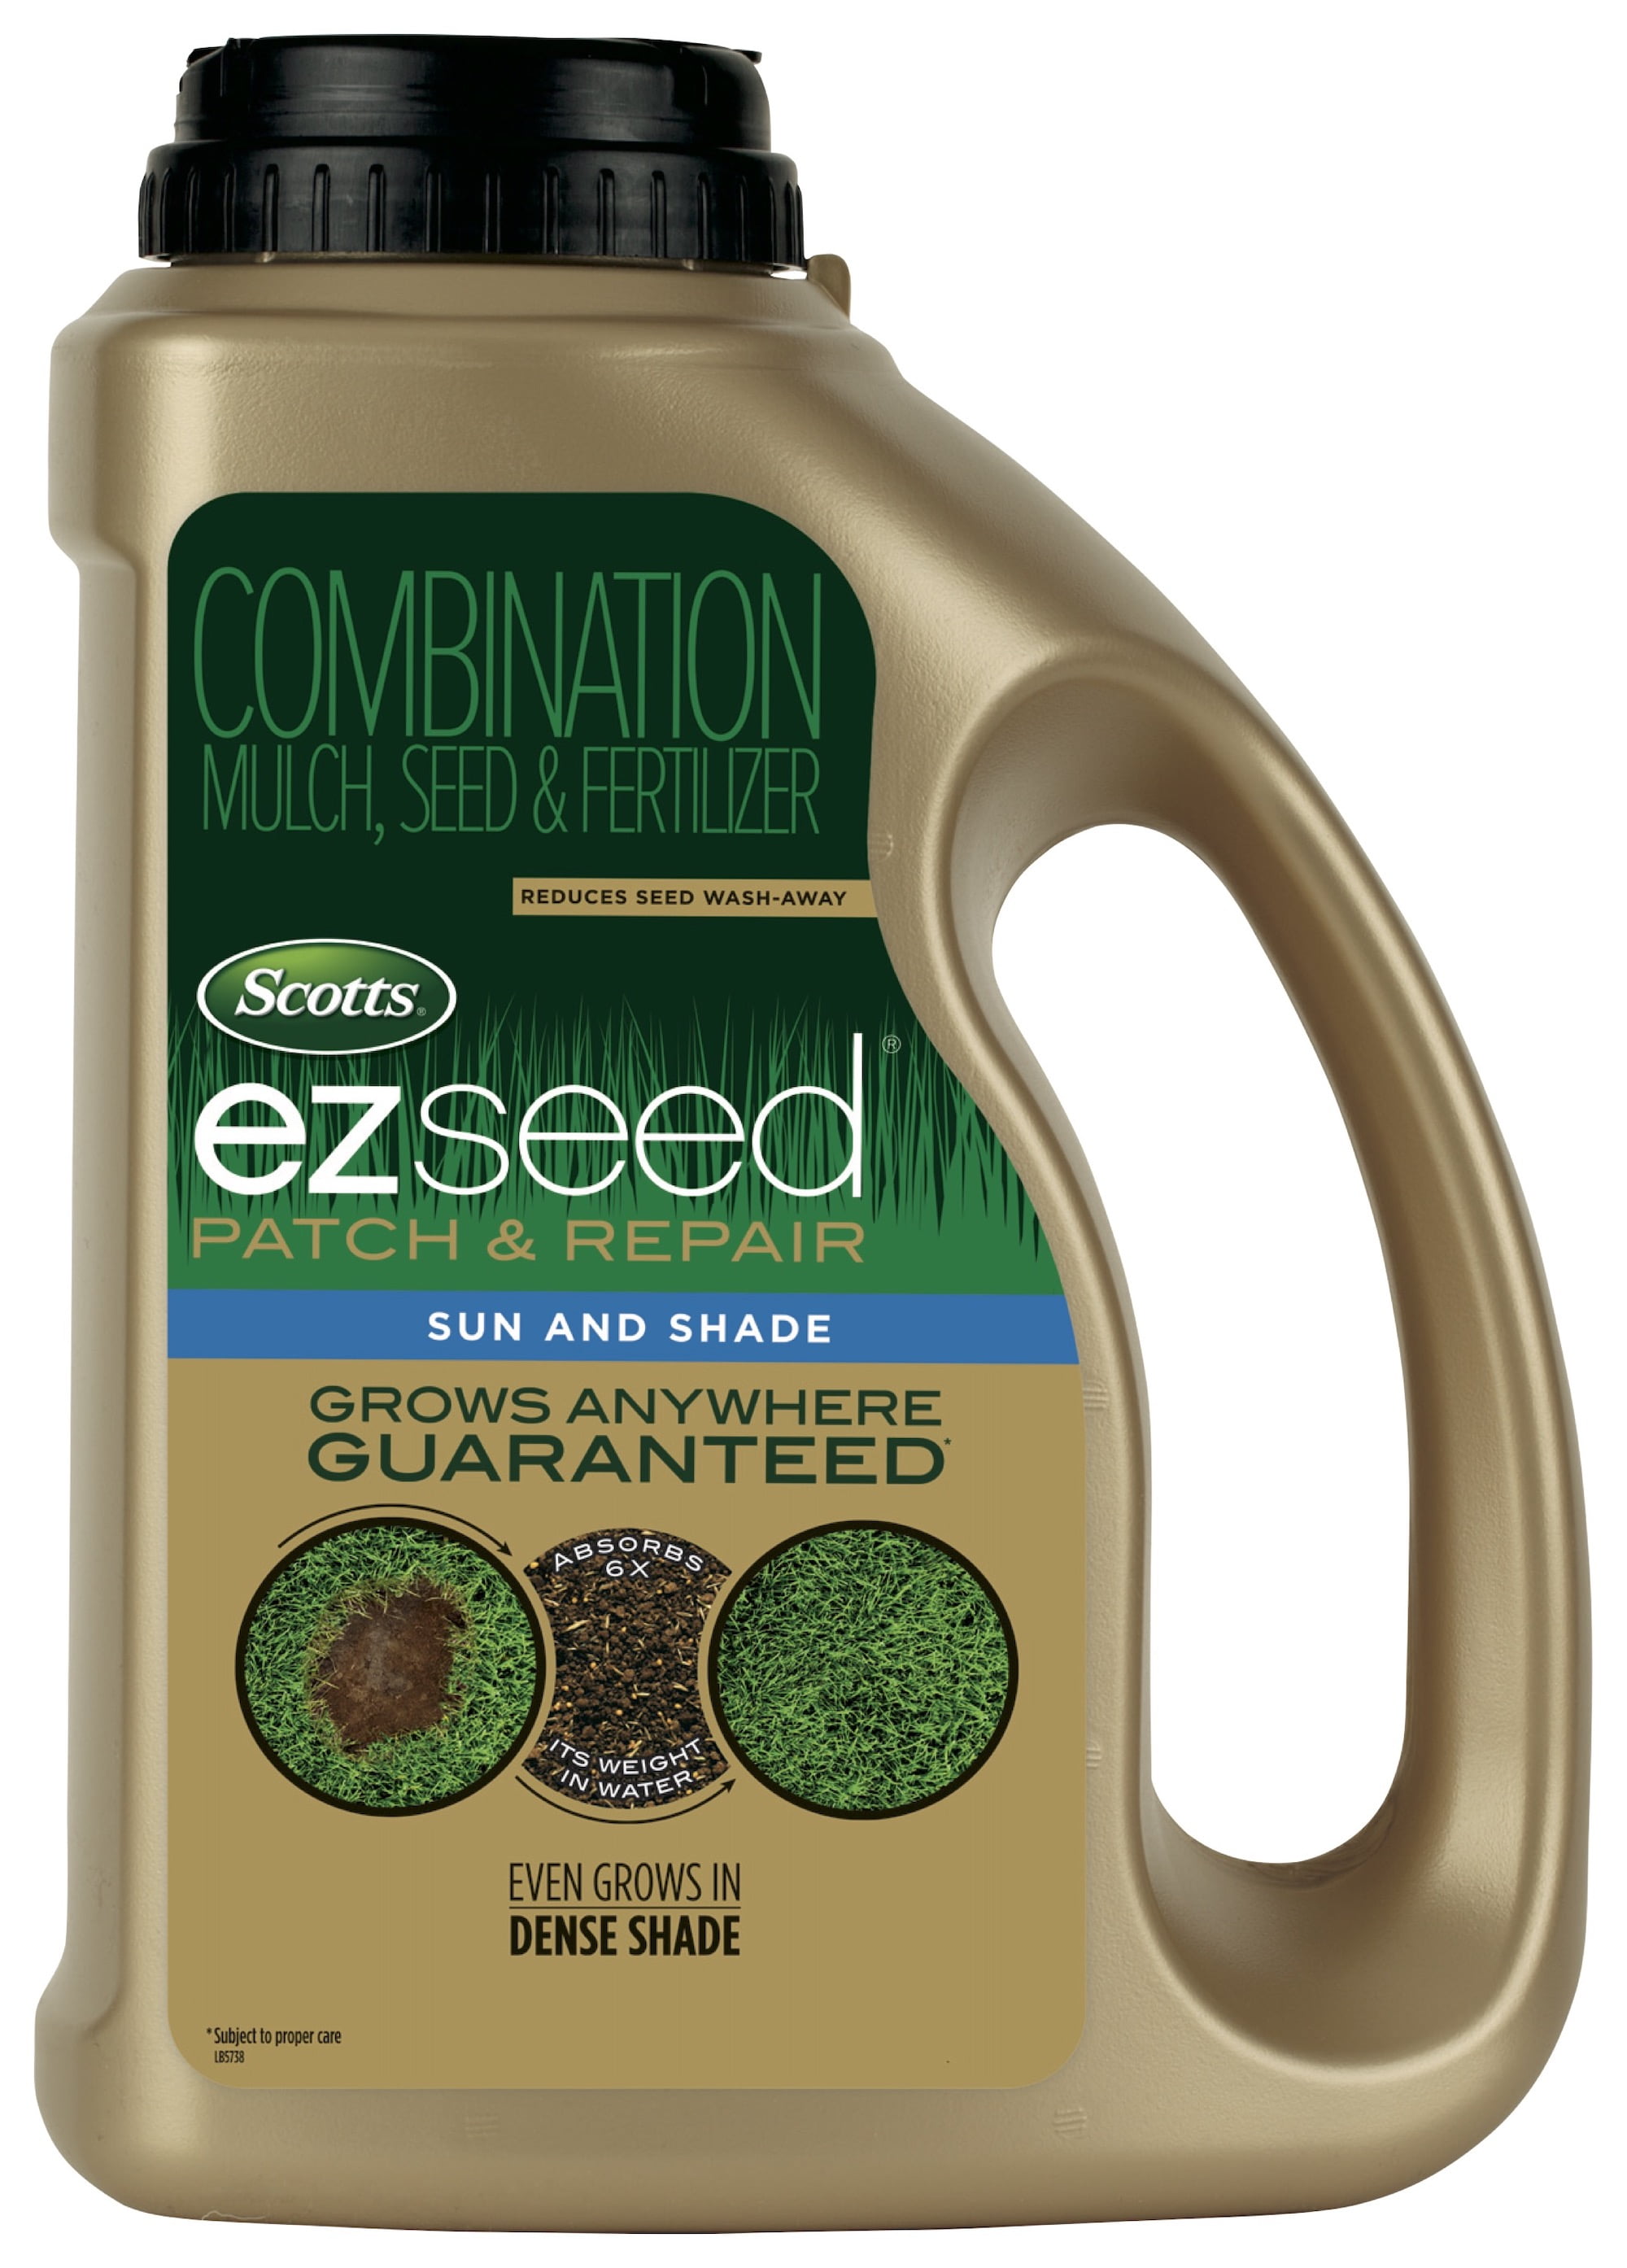 Scotts EZ Seed Patch & Repair Sun and Shade, 3.75 lbs., up to 85 sq. ft.